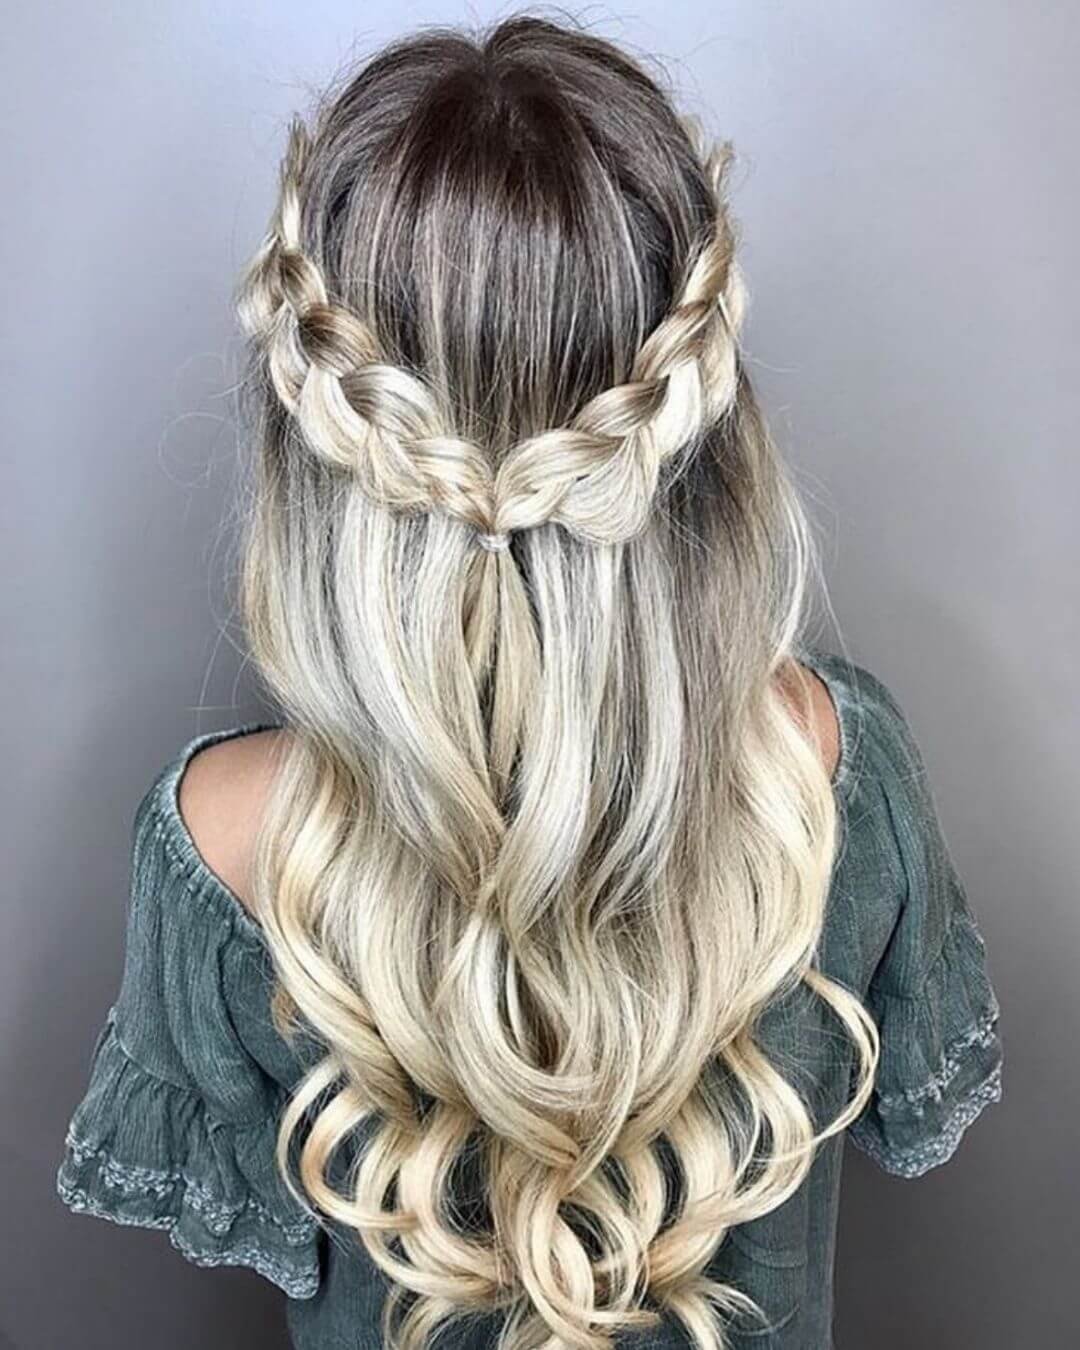 Christmas Inspired Hairstyles and Colors Half Up Dutch Braid Dirty Blonde Long Hair